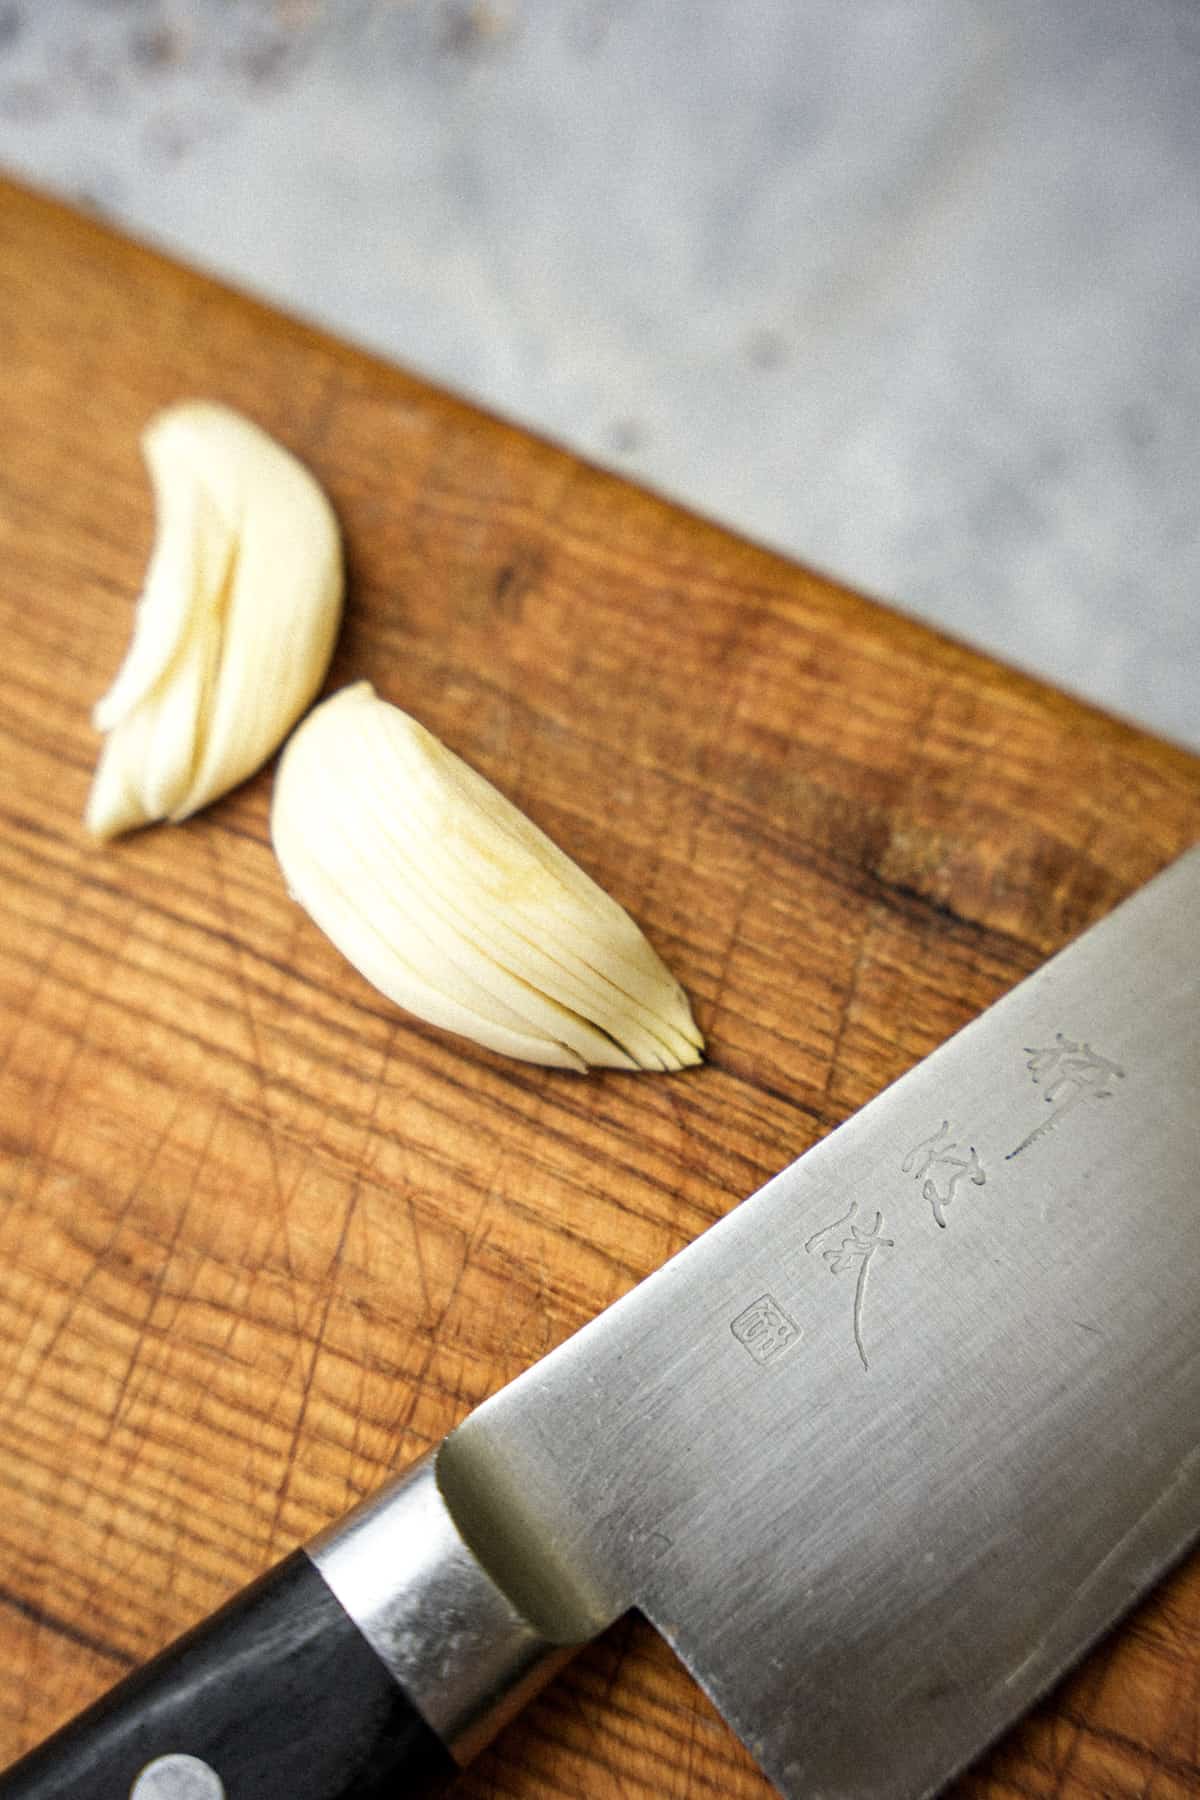 Thinly sliced garlic cloves next to a Japanese knife on a wooden cutting board.